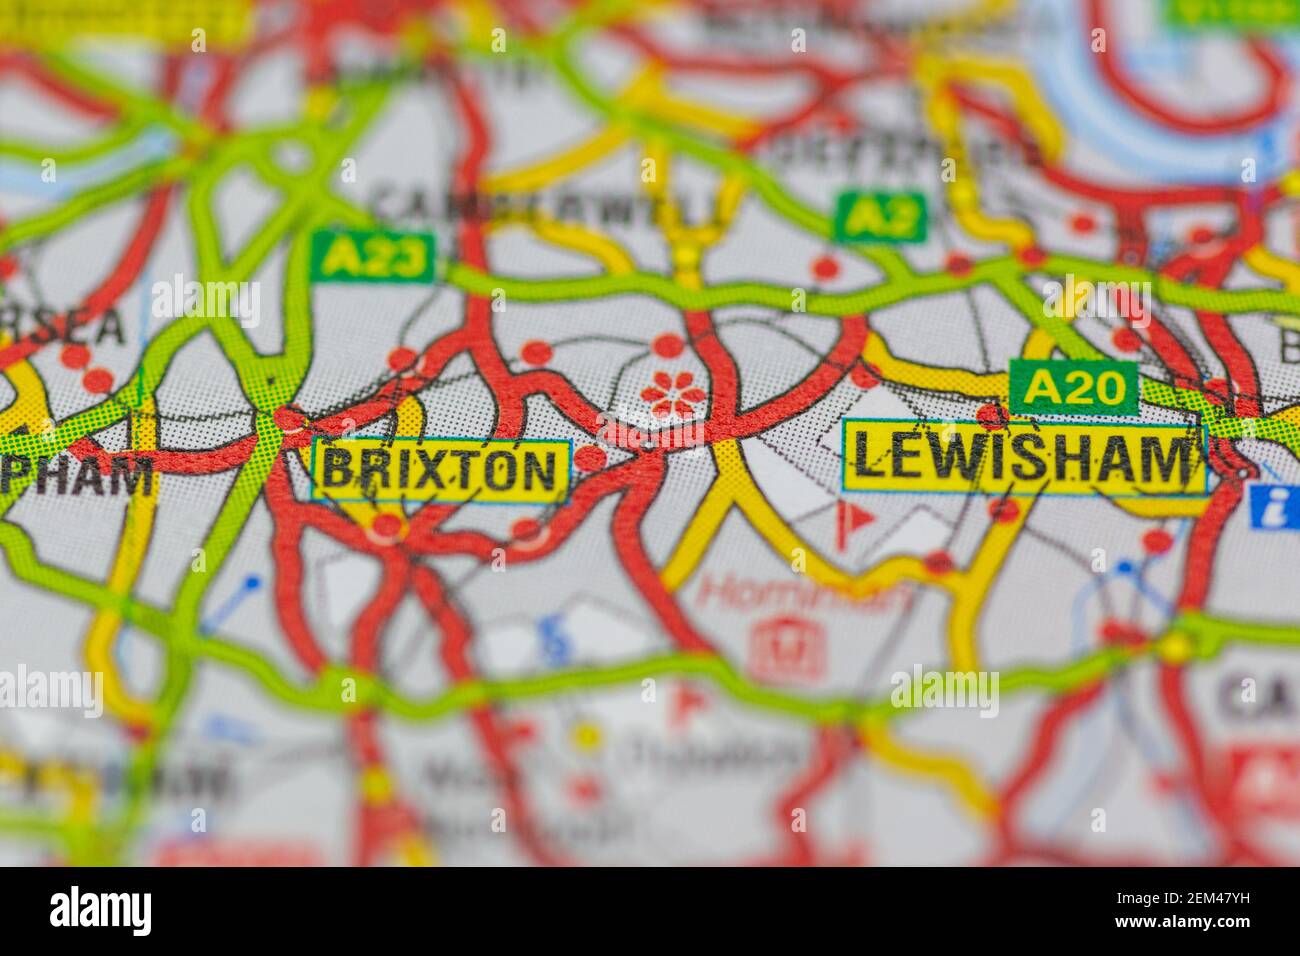 Lewisham and Brixton shown on a road map or geography map Stock Photo